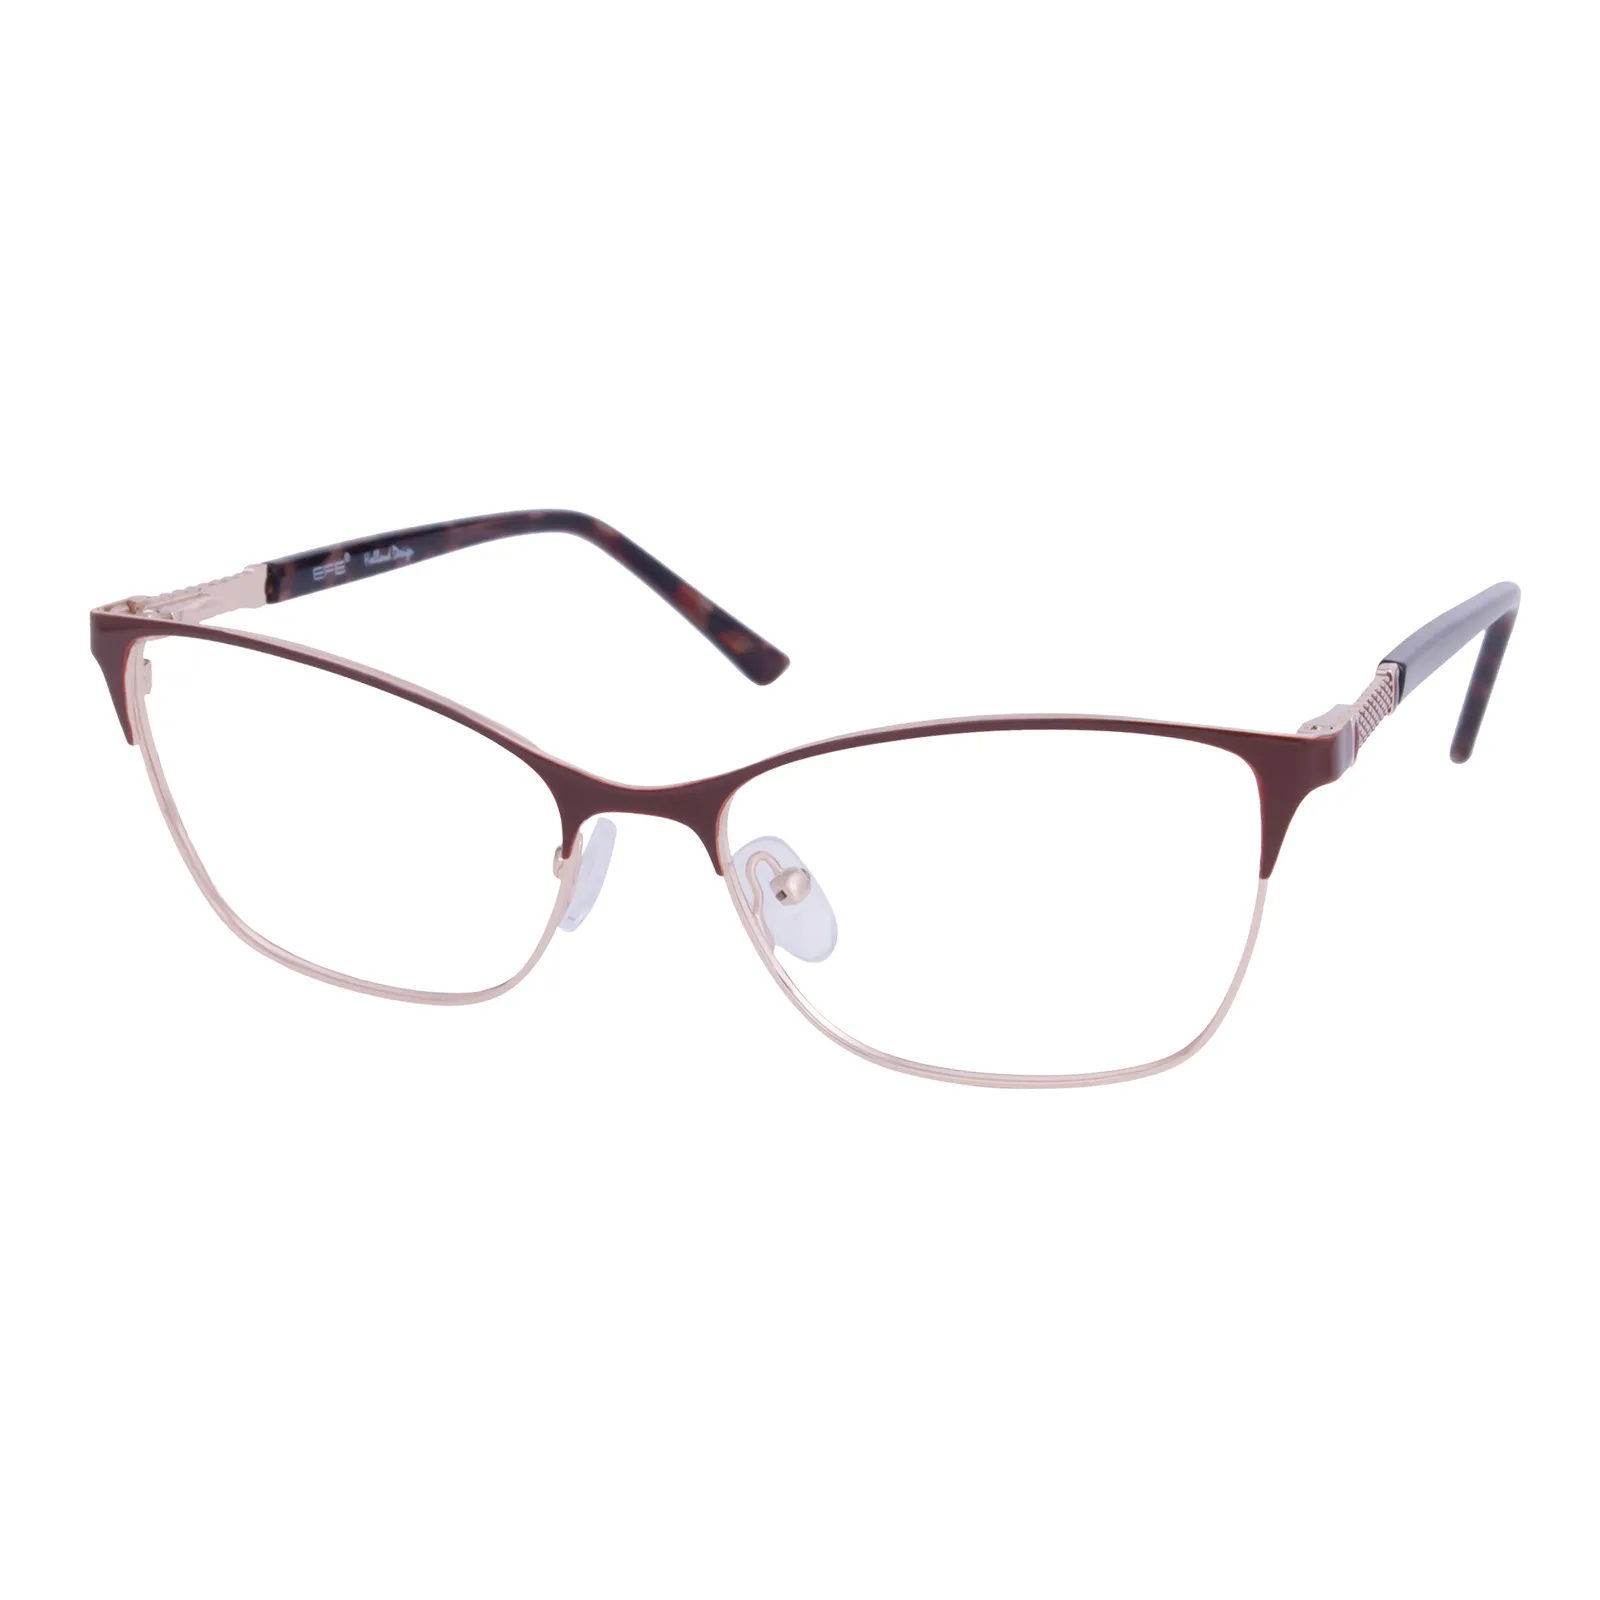 Roberta - Rectangle Brown/Gold Glasses for Women